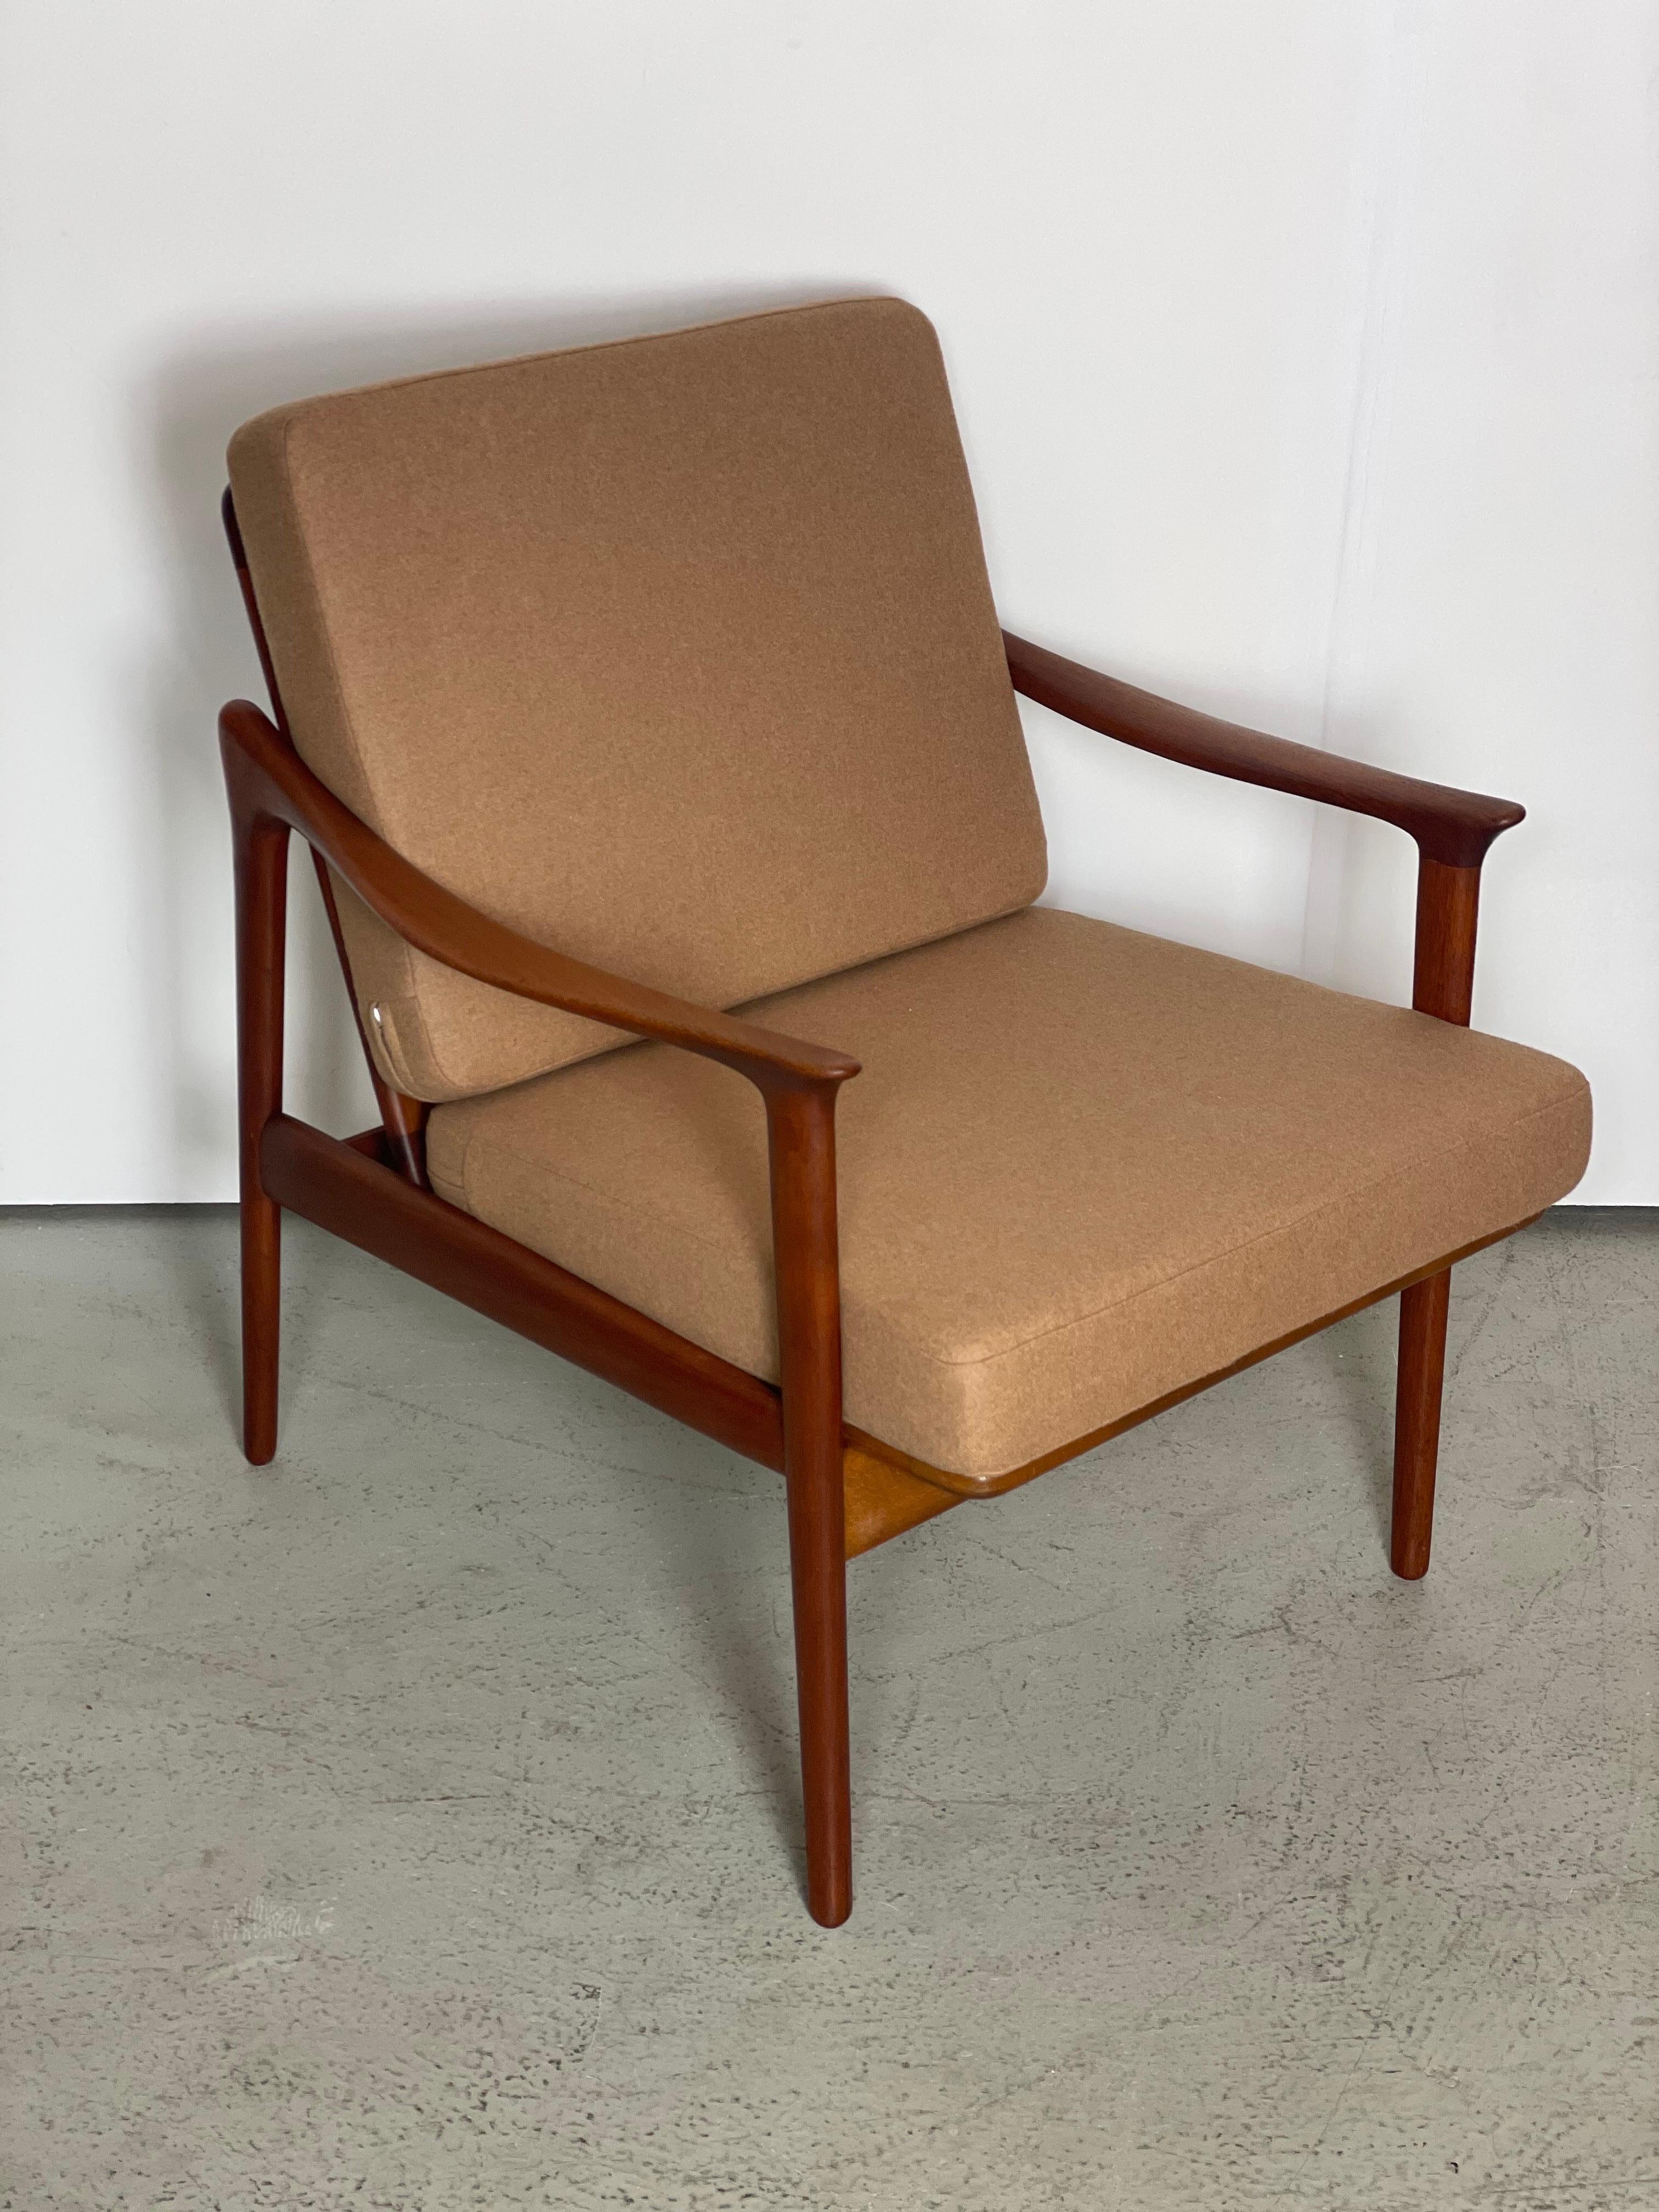 Nordic Teak Easy Chair by Fredrik A. Kayser 1950s For Sale 2